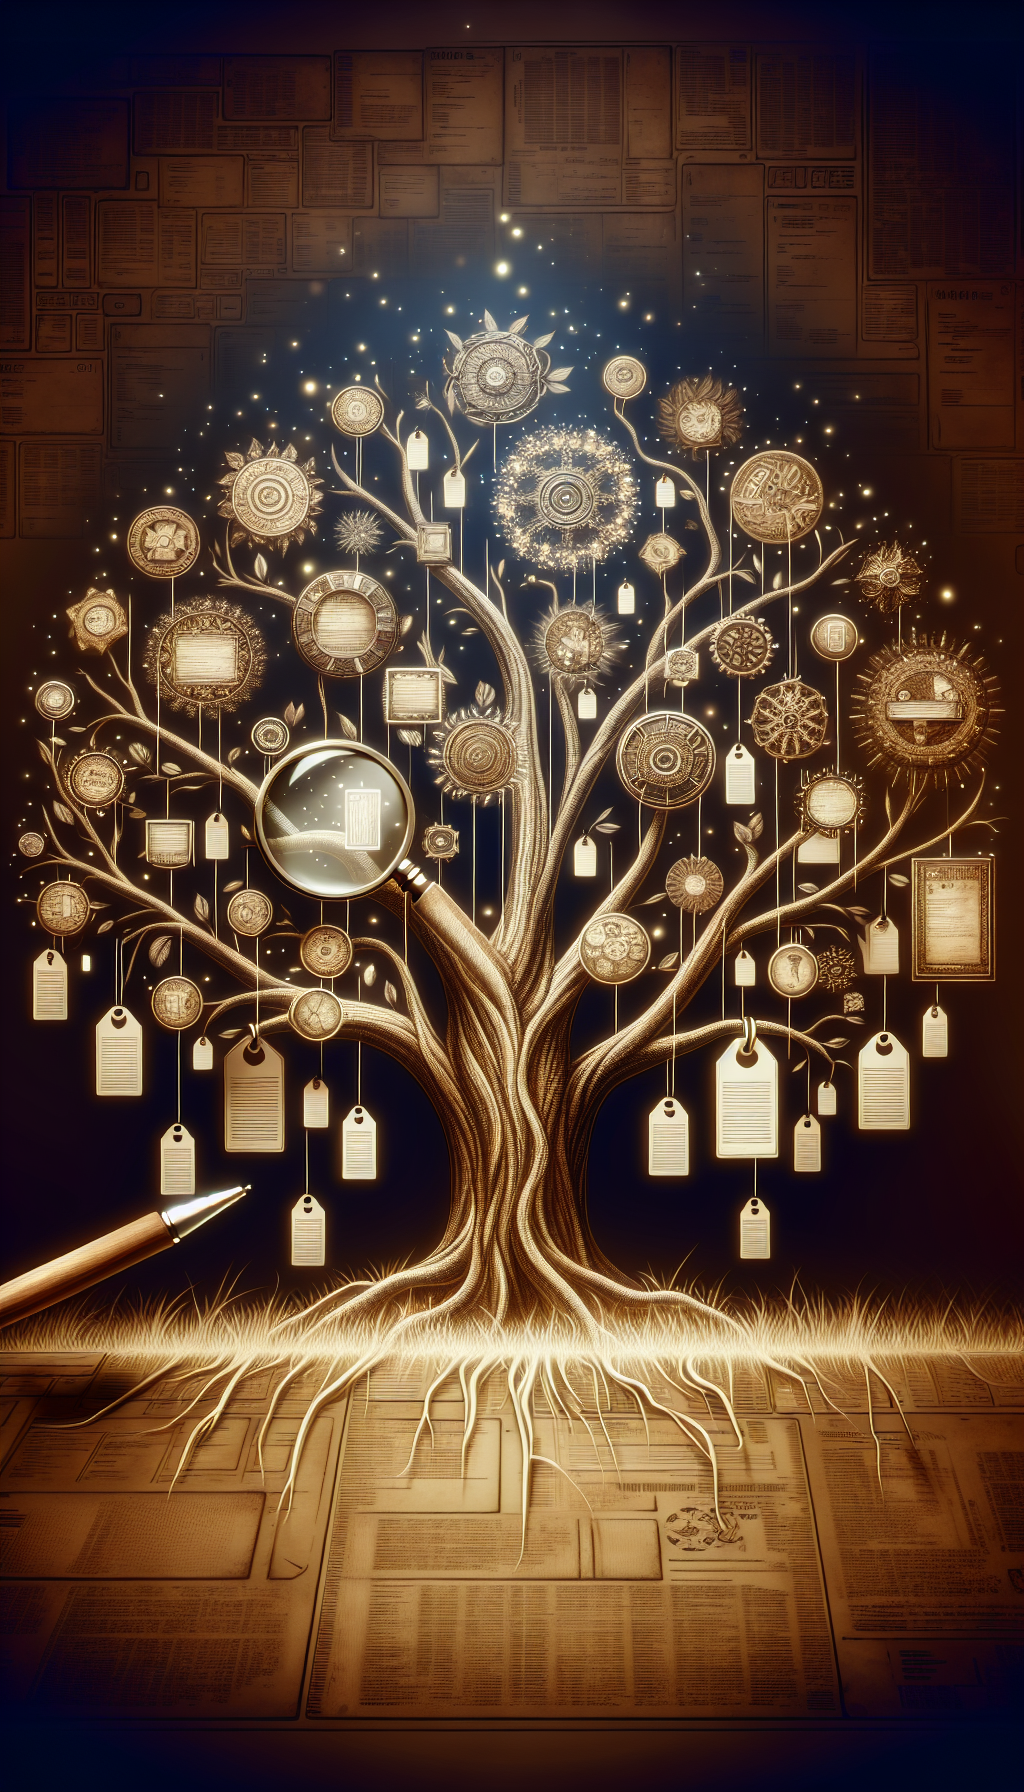 An old, ornate family tree intertwines with various antique tools as the branches, each inscribed with dates and origins. Hanging from the sturdy limbs are price tags that subtly shimmer, indicating their value. The roots, artistically morphing into a magnifying glass, symbolize the investigation into the tools' past, enhancing the impression of the tools' storied provenance and pedigree.